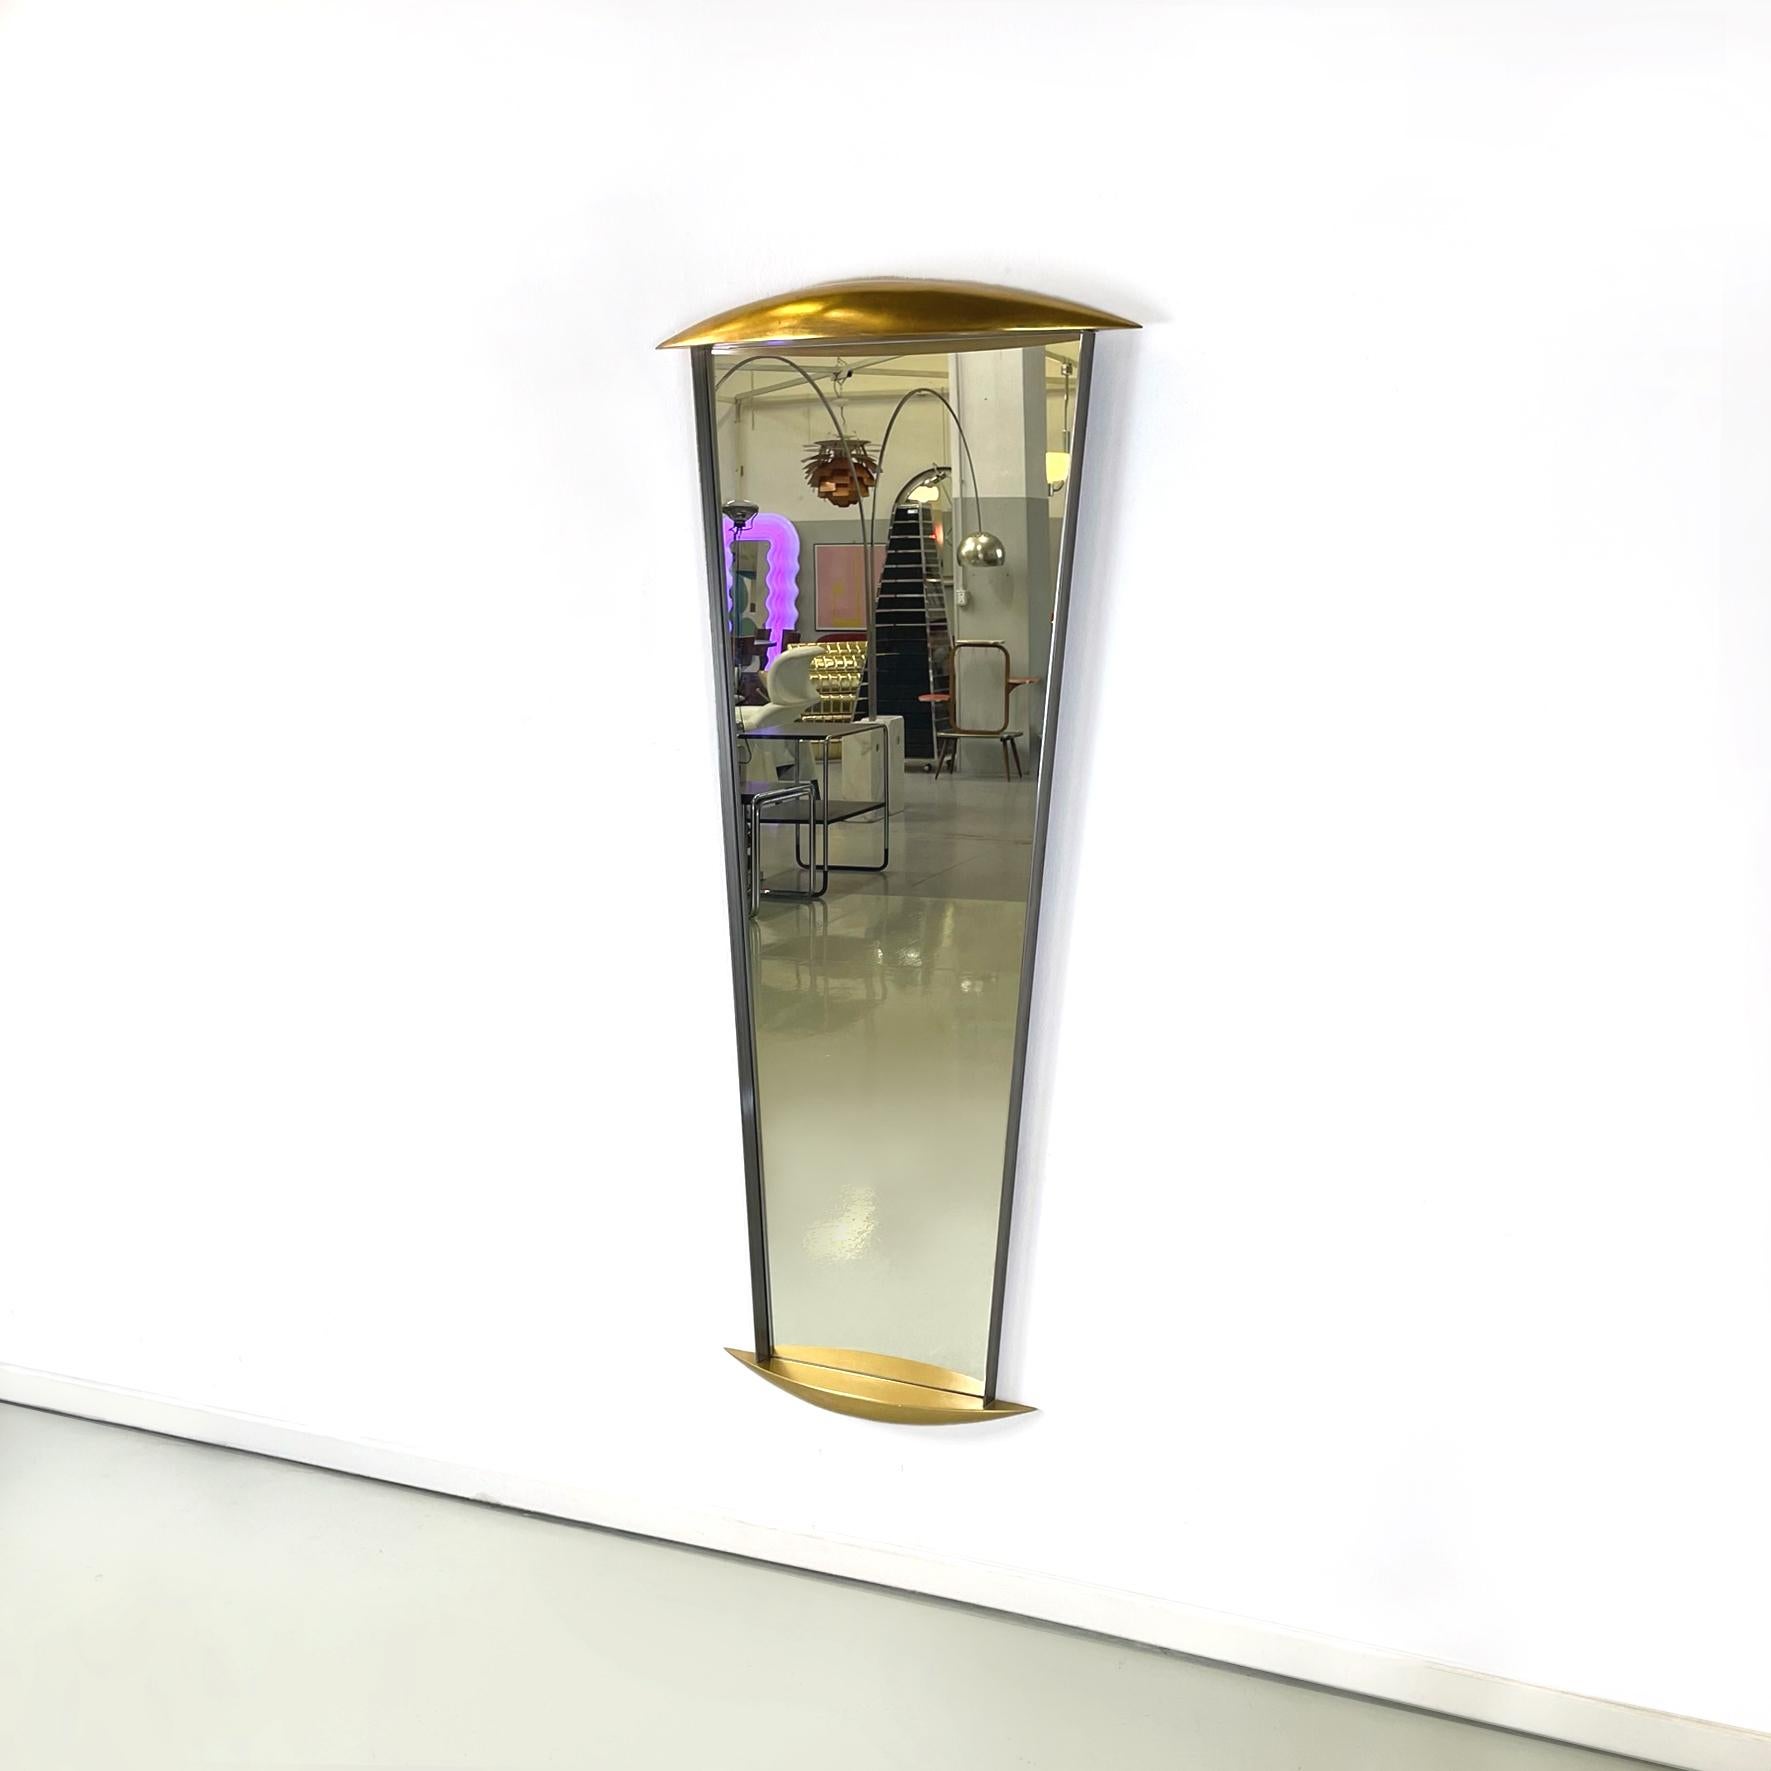 Italian modern Full-length wall mirror in gold wood and metal, 1980s
Full-length wall mirror with wooden and metal profiles. The upper and lower profile has two semi-ovals in wood with a golden finish. On the sides it has two thin metal plates.